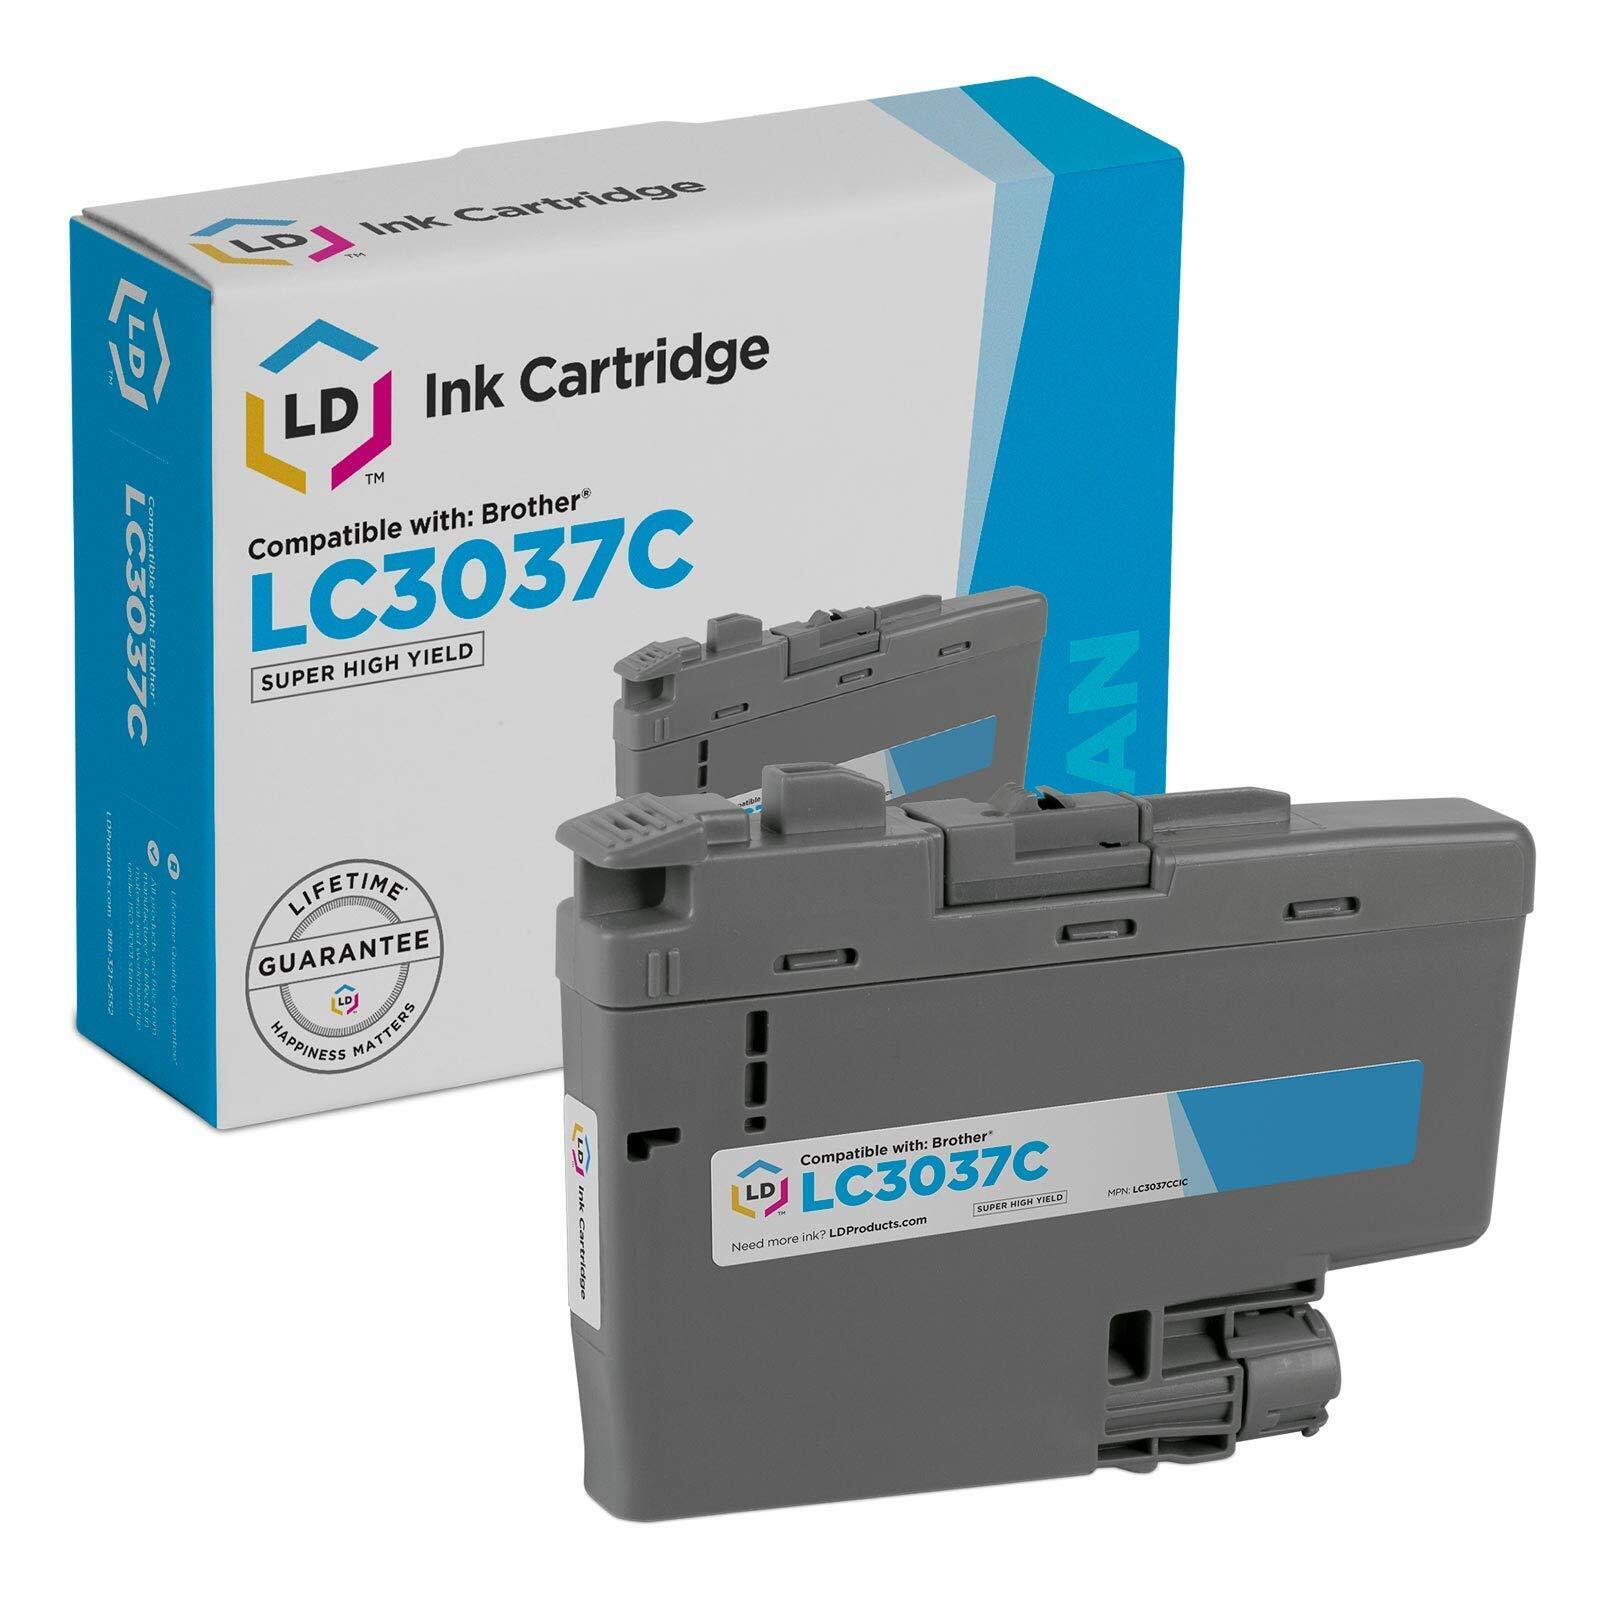 LD Compatible Brother LC3037C Super High Yield Cyan Ink Cartridge